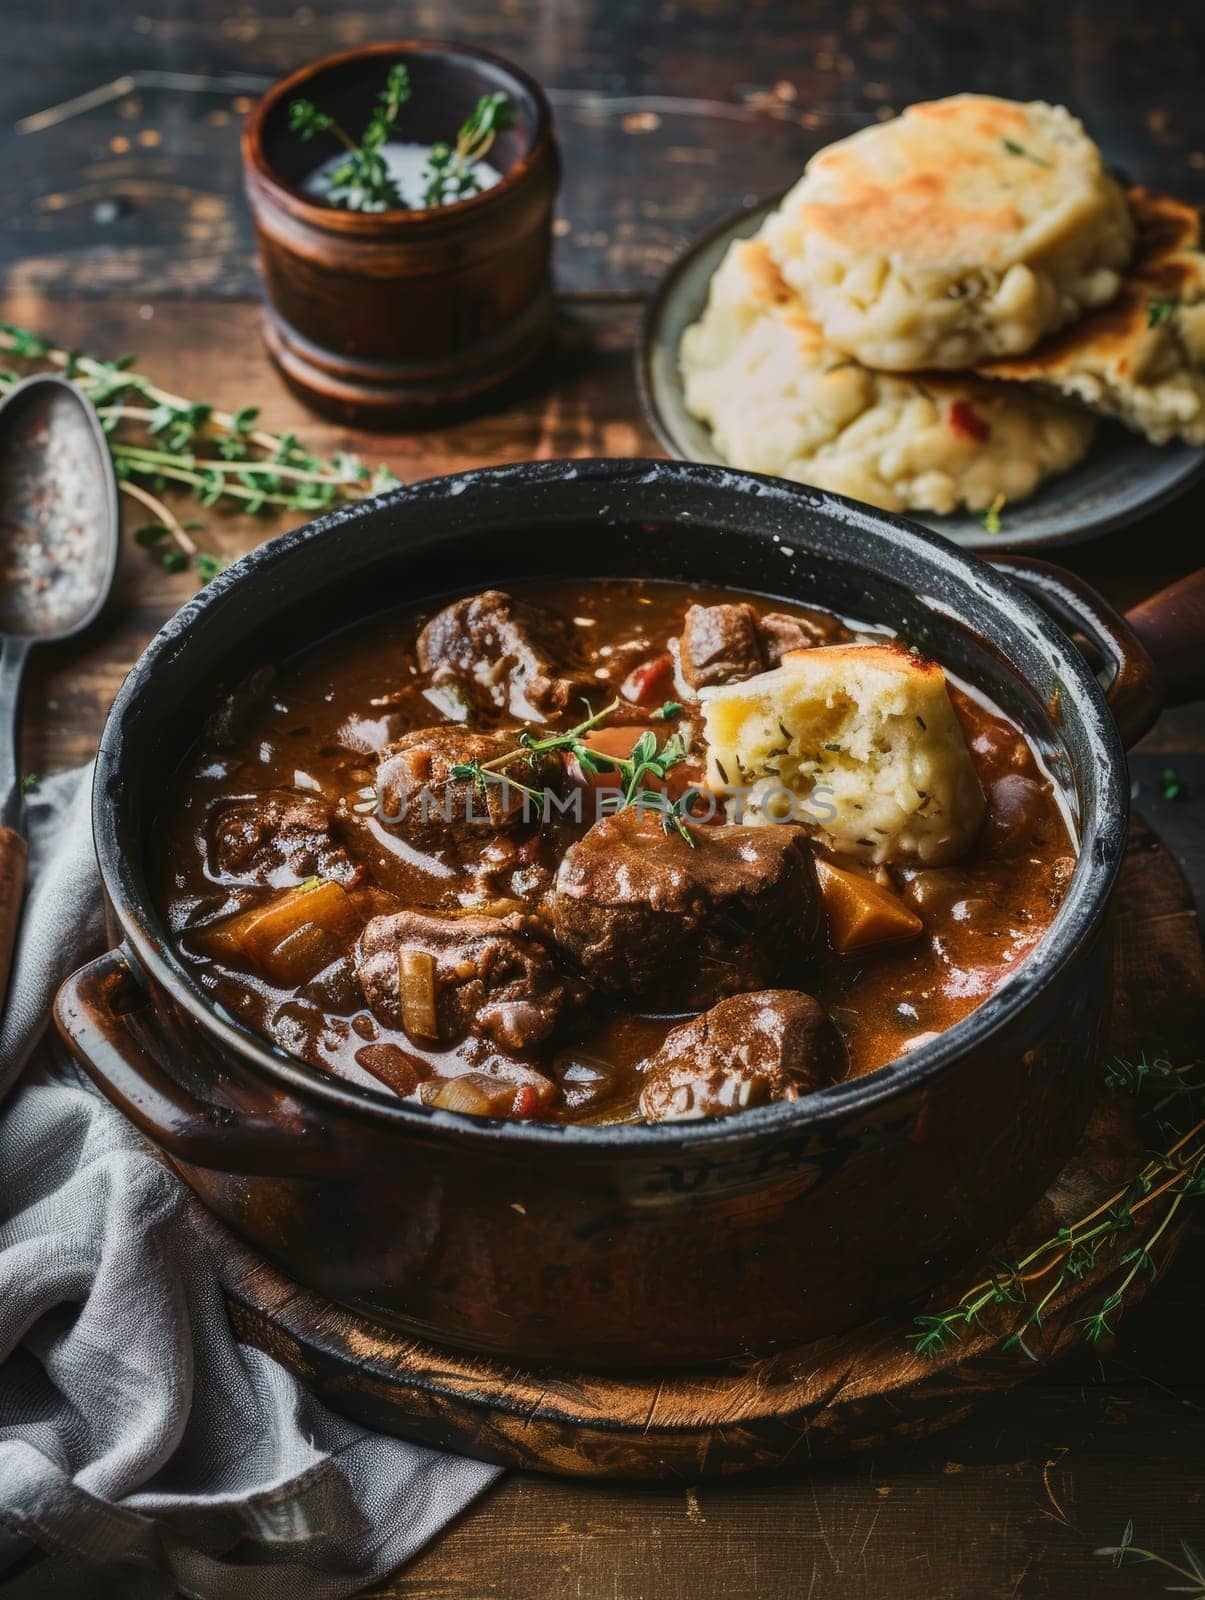 Hungarian goulash, a hearty beef stew simmered in a rich paprika-infused broth, served with fluffy dumplings in a rustic, authentic presentation. Dish represents the traditional of Hungarian cuisine. by sfinks